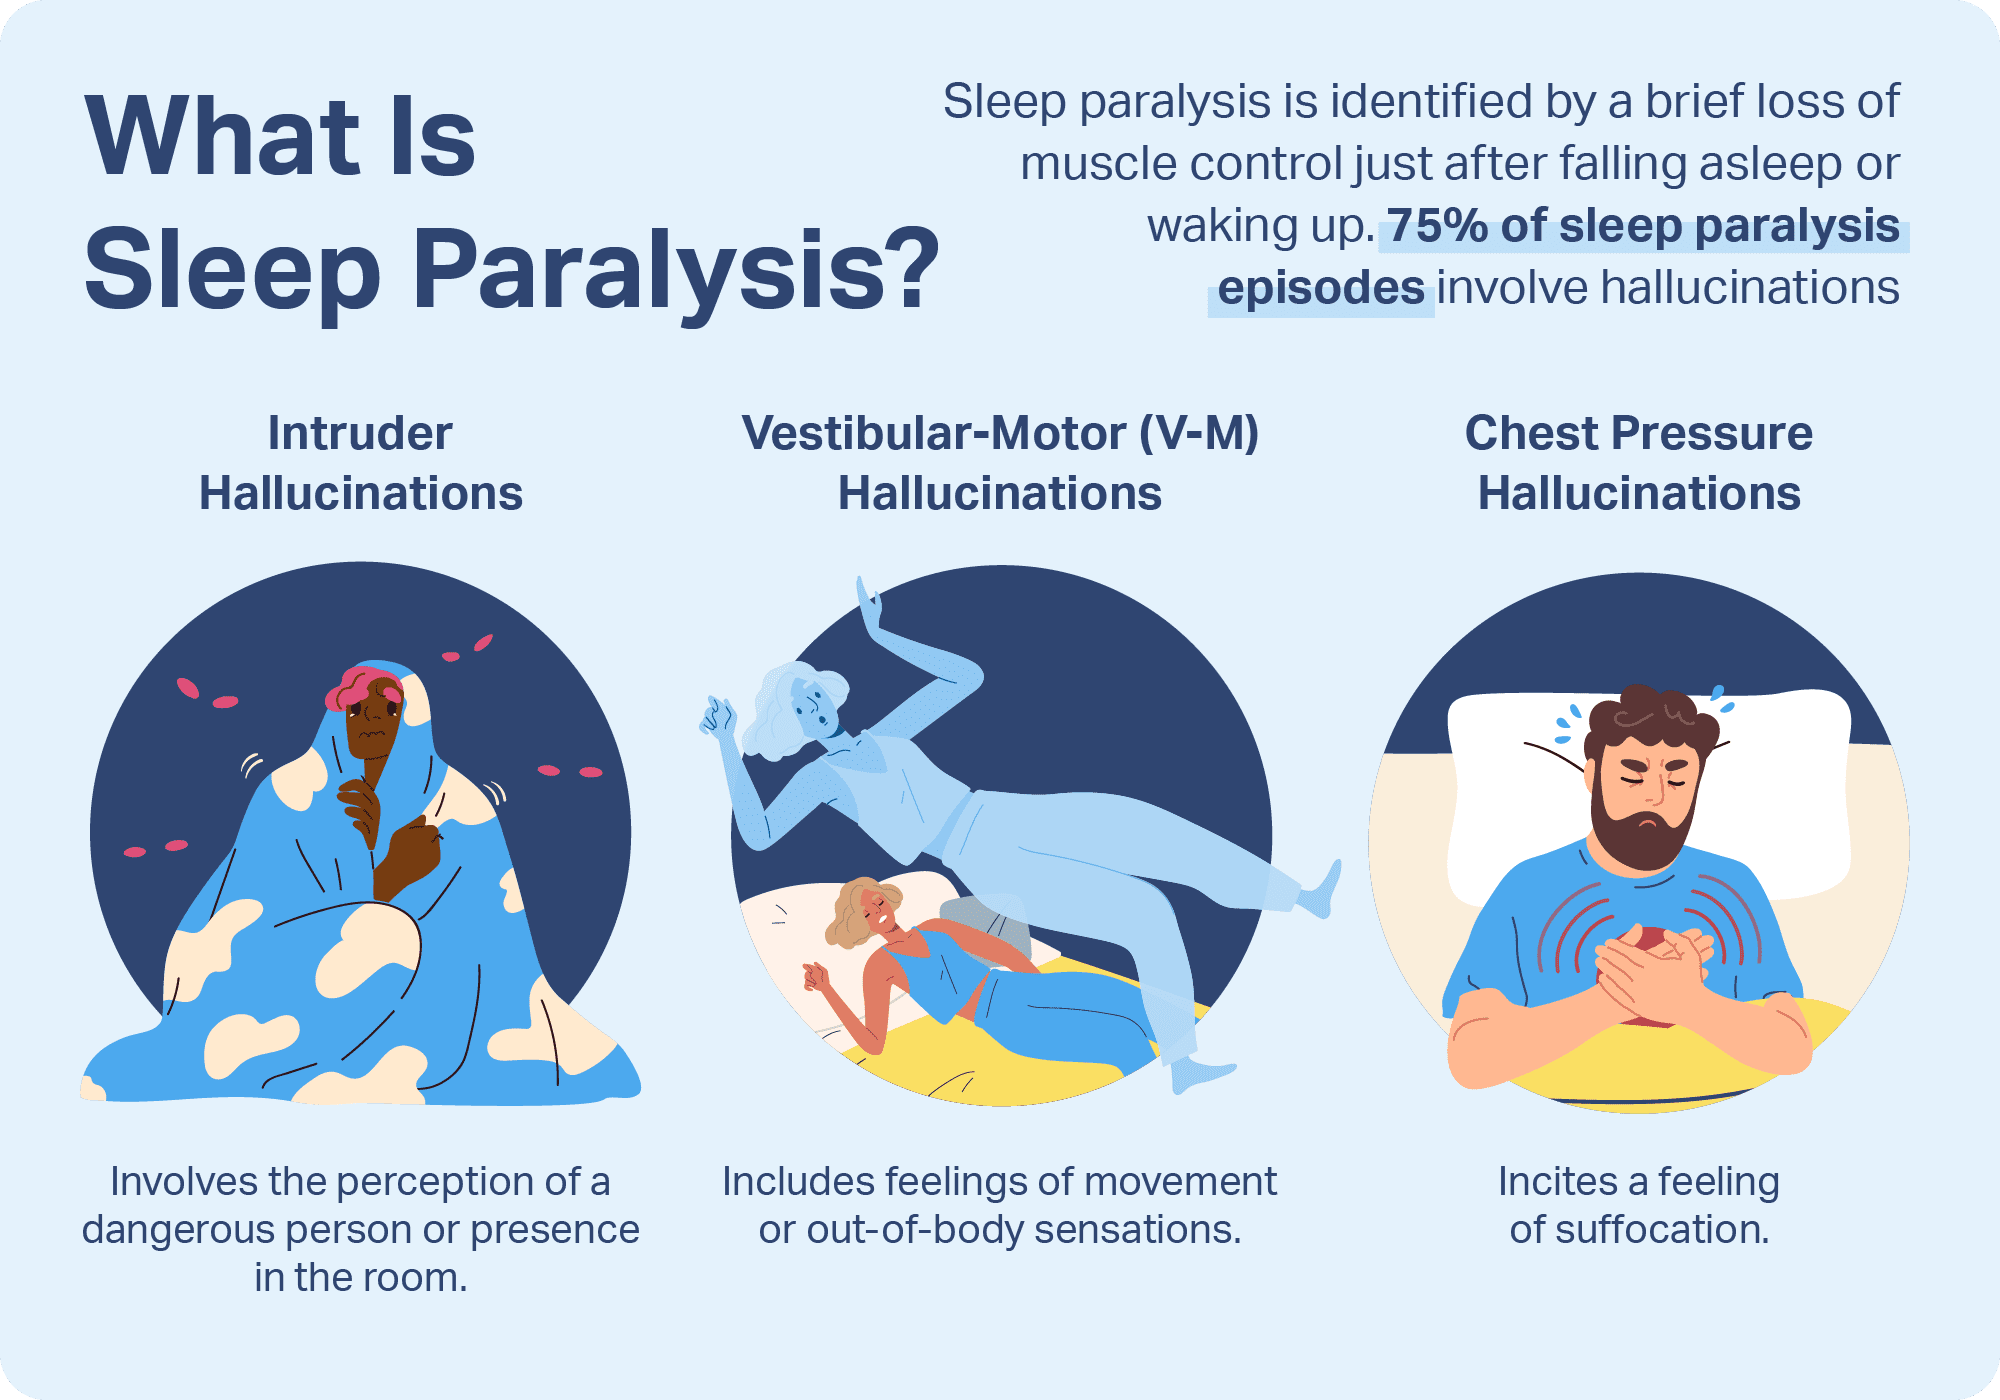 Infographic dsiplaying the 3 types of hallucinations: intruder hallucinations, chest pressure hallucinations, and vestibular-motor hallucinations.